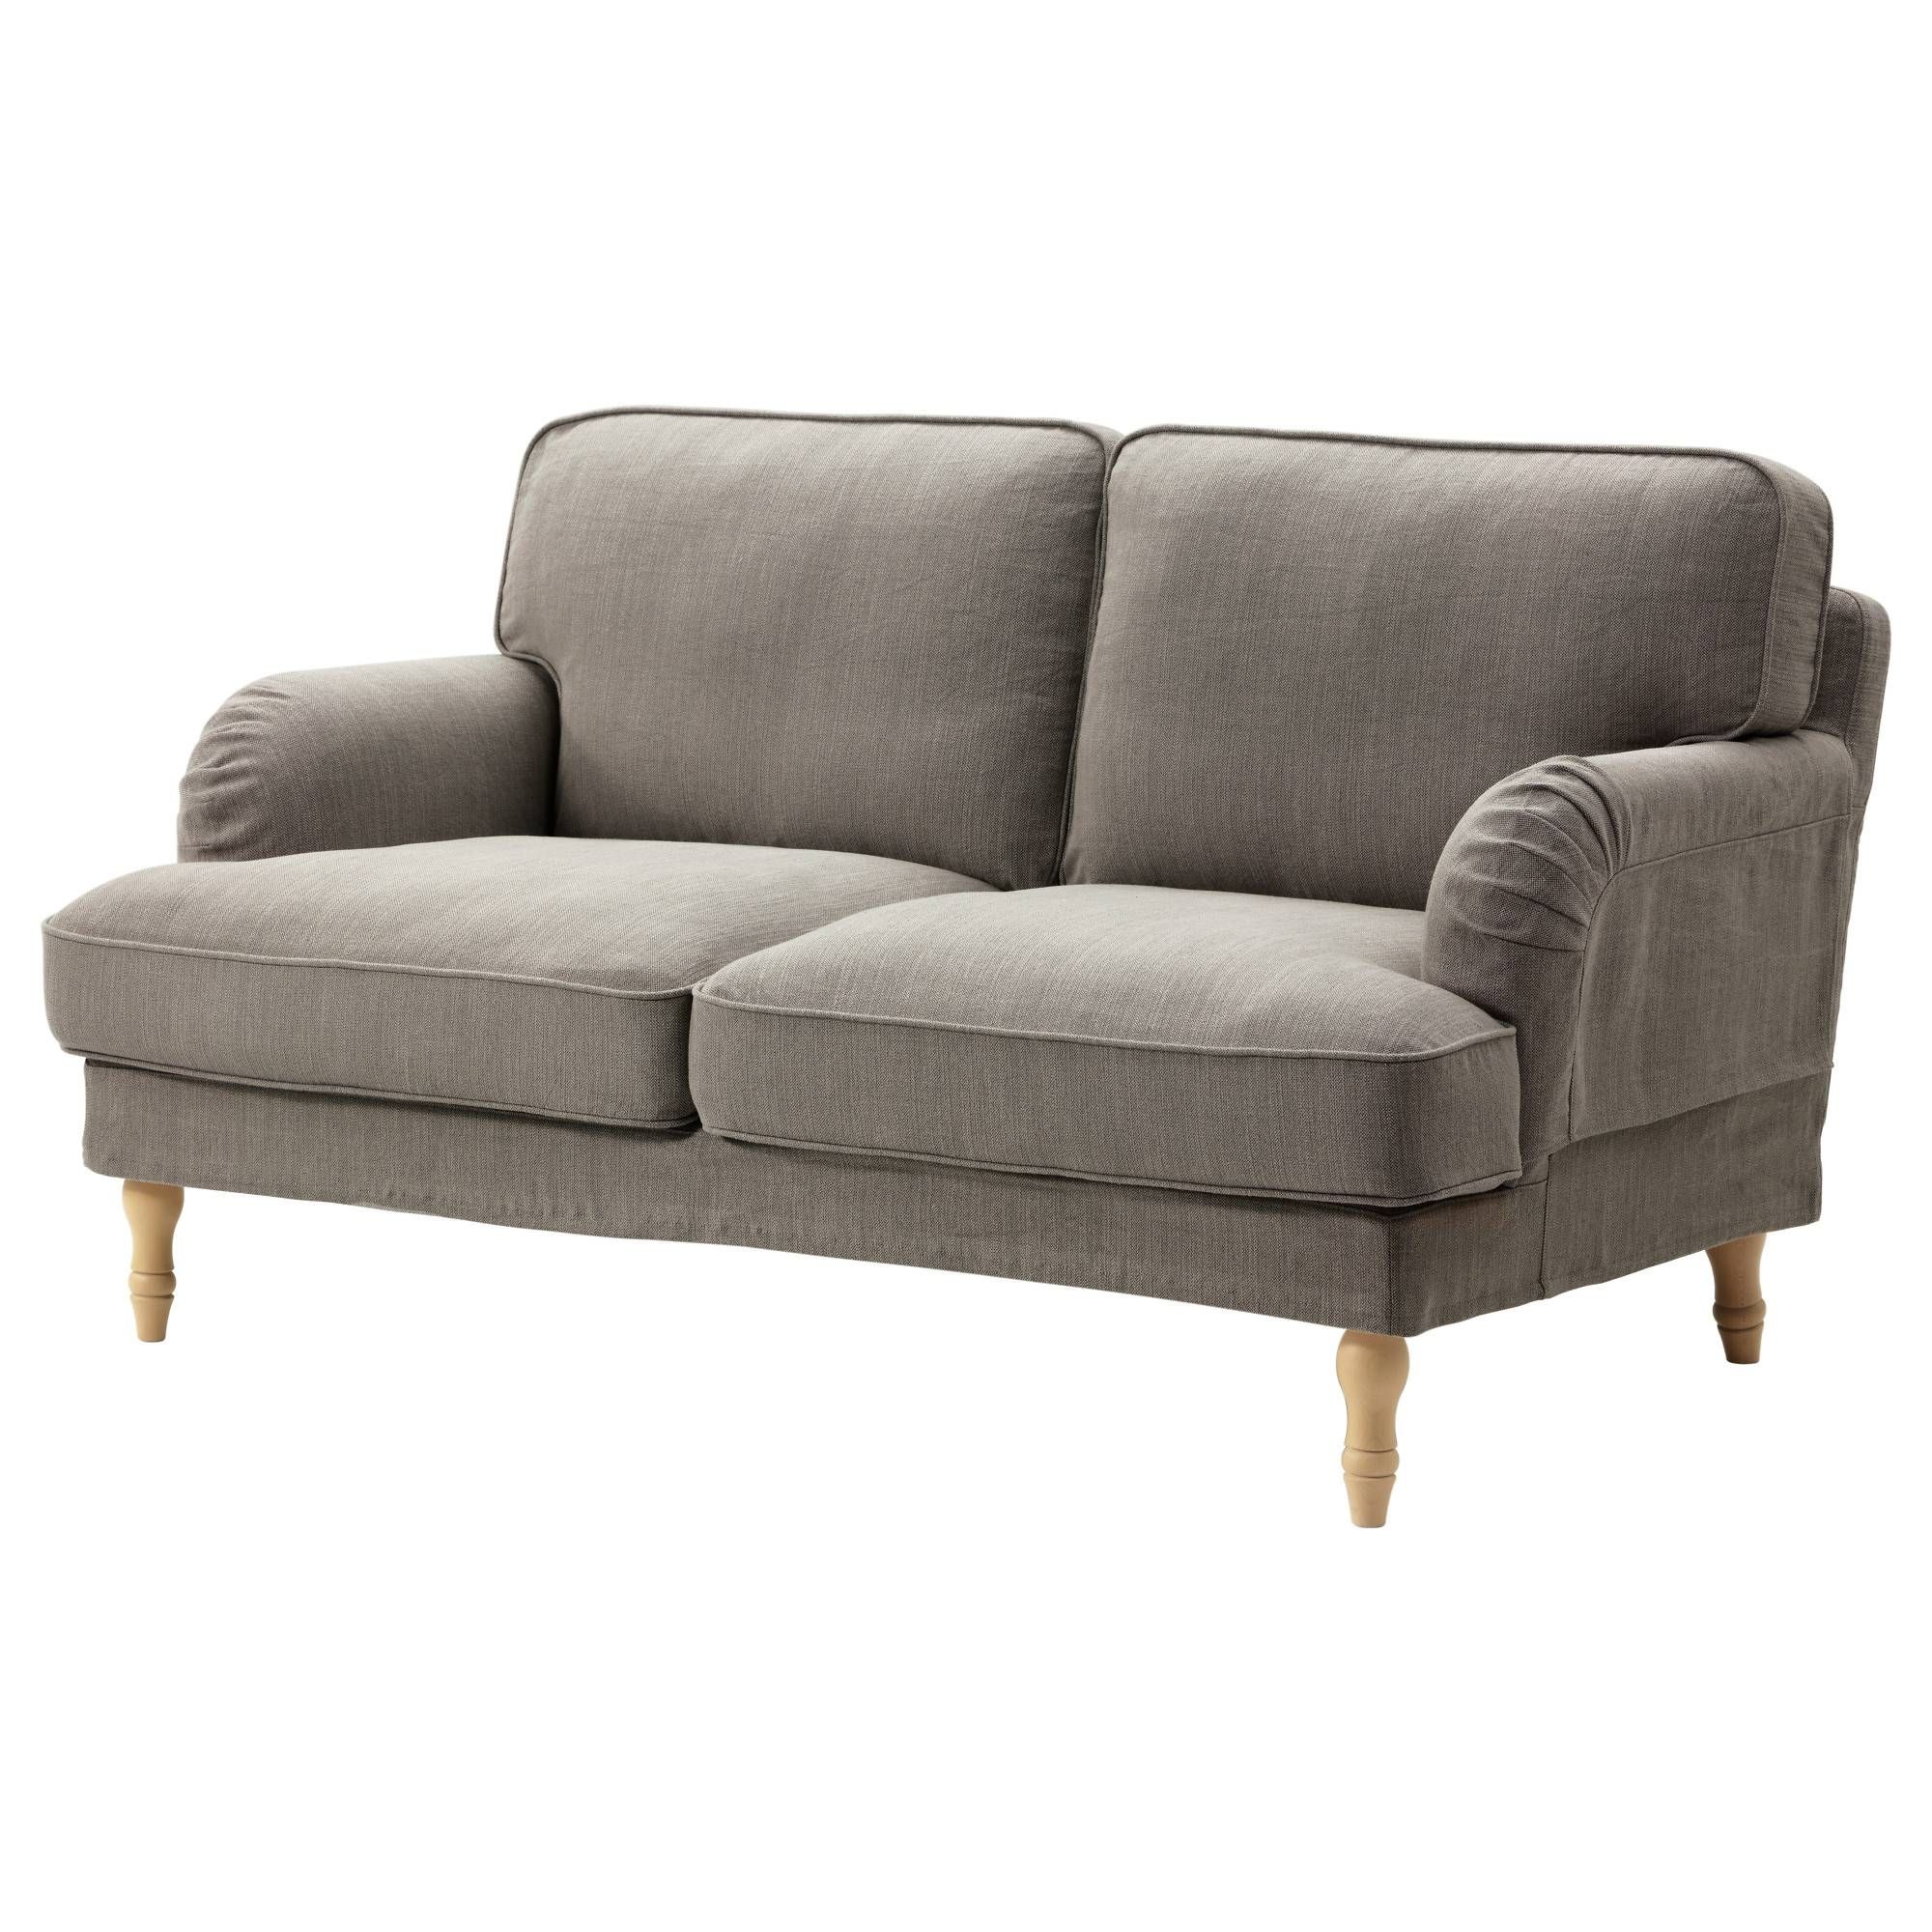 Stocksund Two Seat Sofa Nolhaga Grey Beige/light Brown/wood – Ikea Throughout Two Seater Chairs (View 23 of 30)